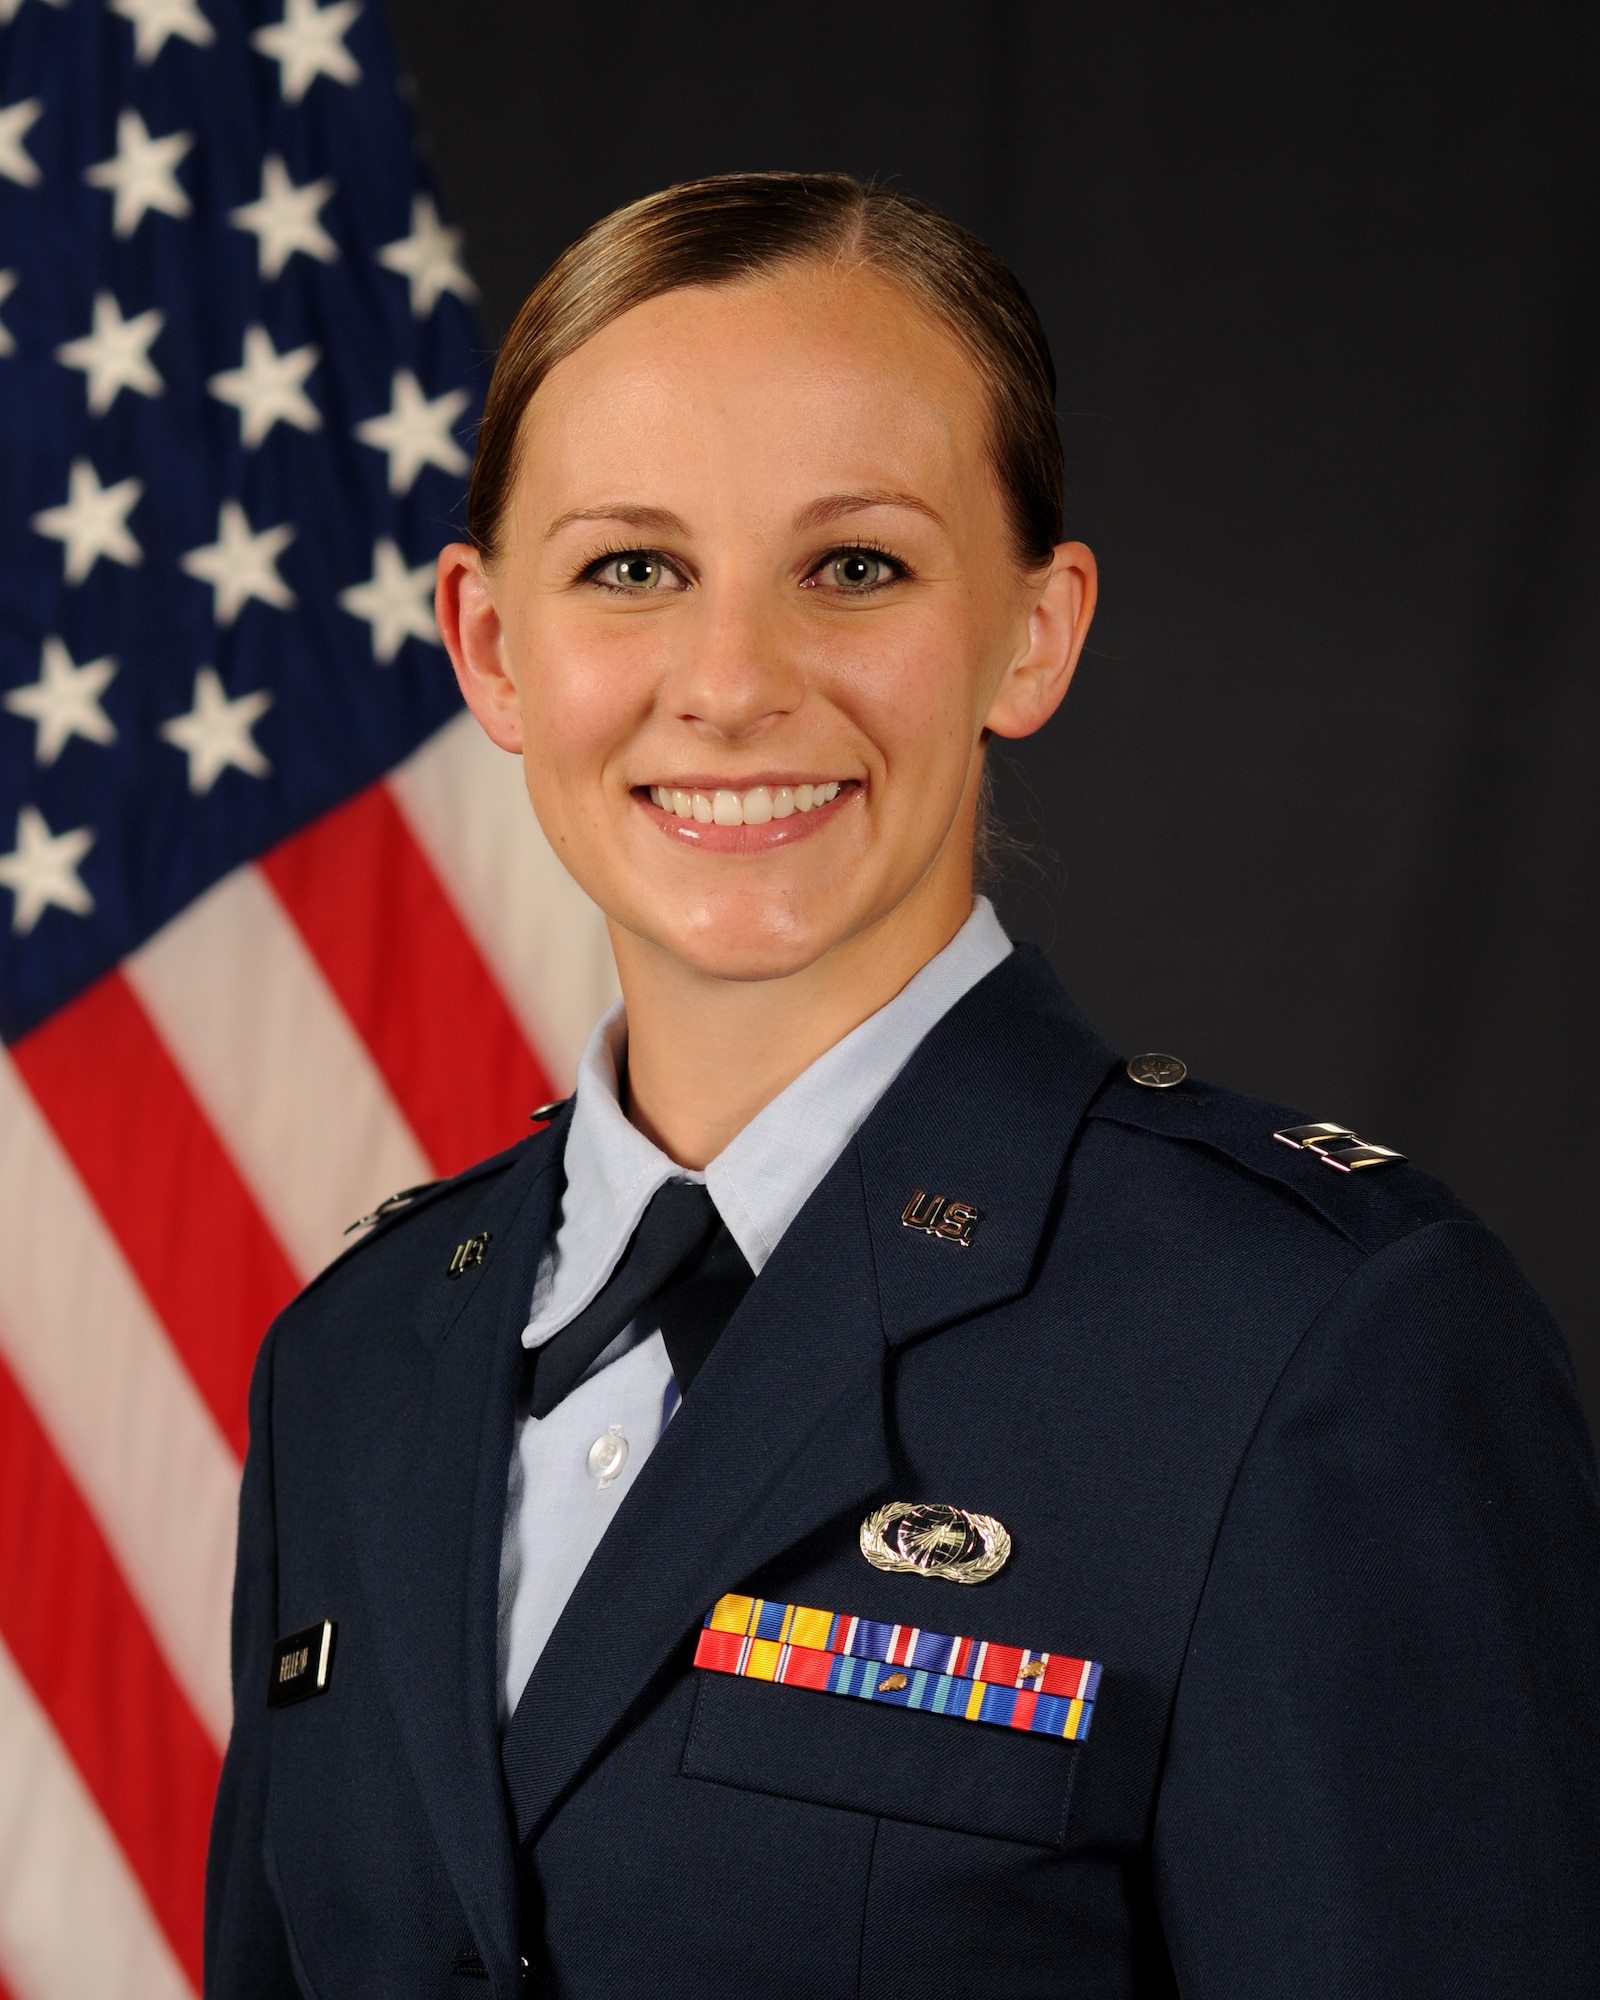 Capt. Elizabeth Belleau, a behavioral scientist, earned the sexual assault response coordinator of the year award for her work both as the SARC at Kadena Air Base, Japan, and while deployed as the SARC for the 435th Air Expeditionary Wing, U.S. Africa Command, April 28th, 2016. The award recognizes the Air Force SARC whose work has been particularly noteworthy and demonstrates outstanding service in support of service members. (U.S. Air Force photo by SrA Malia Jenkins/Released)